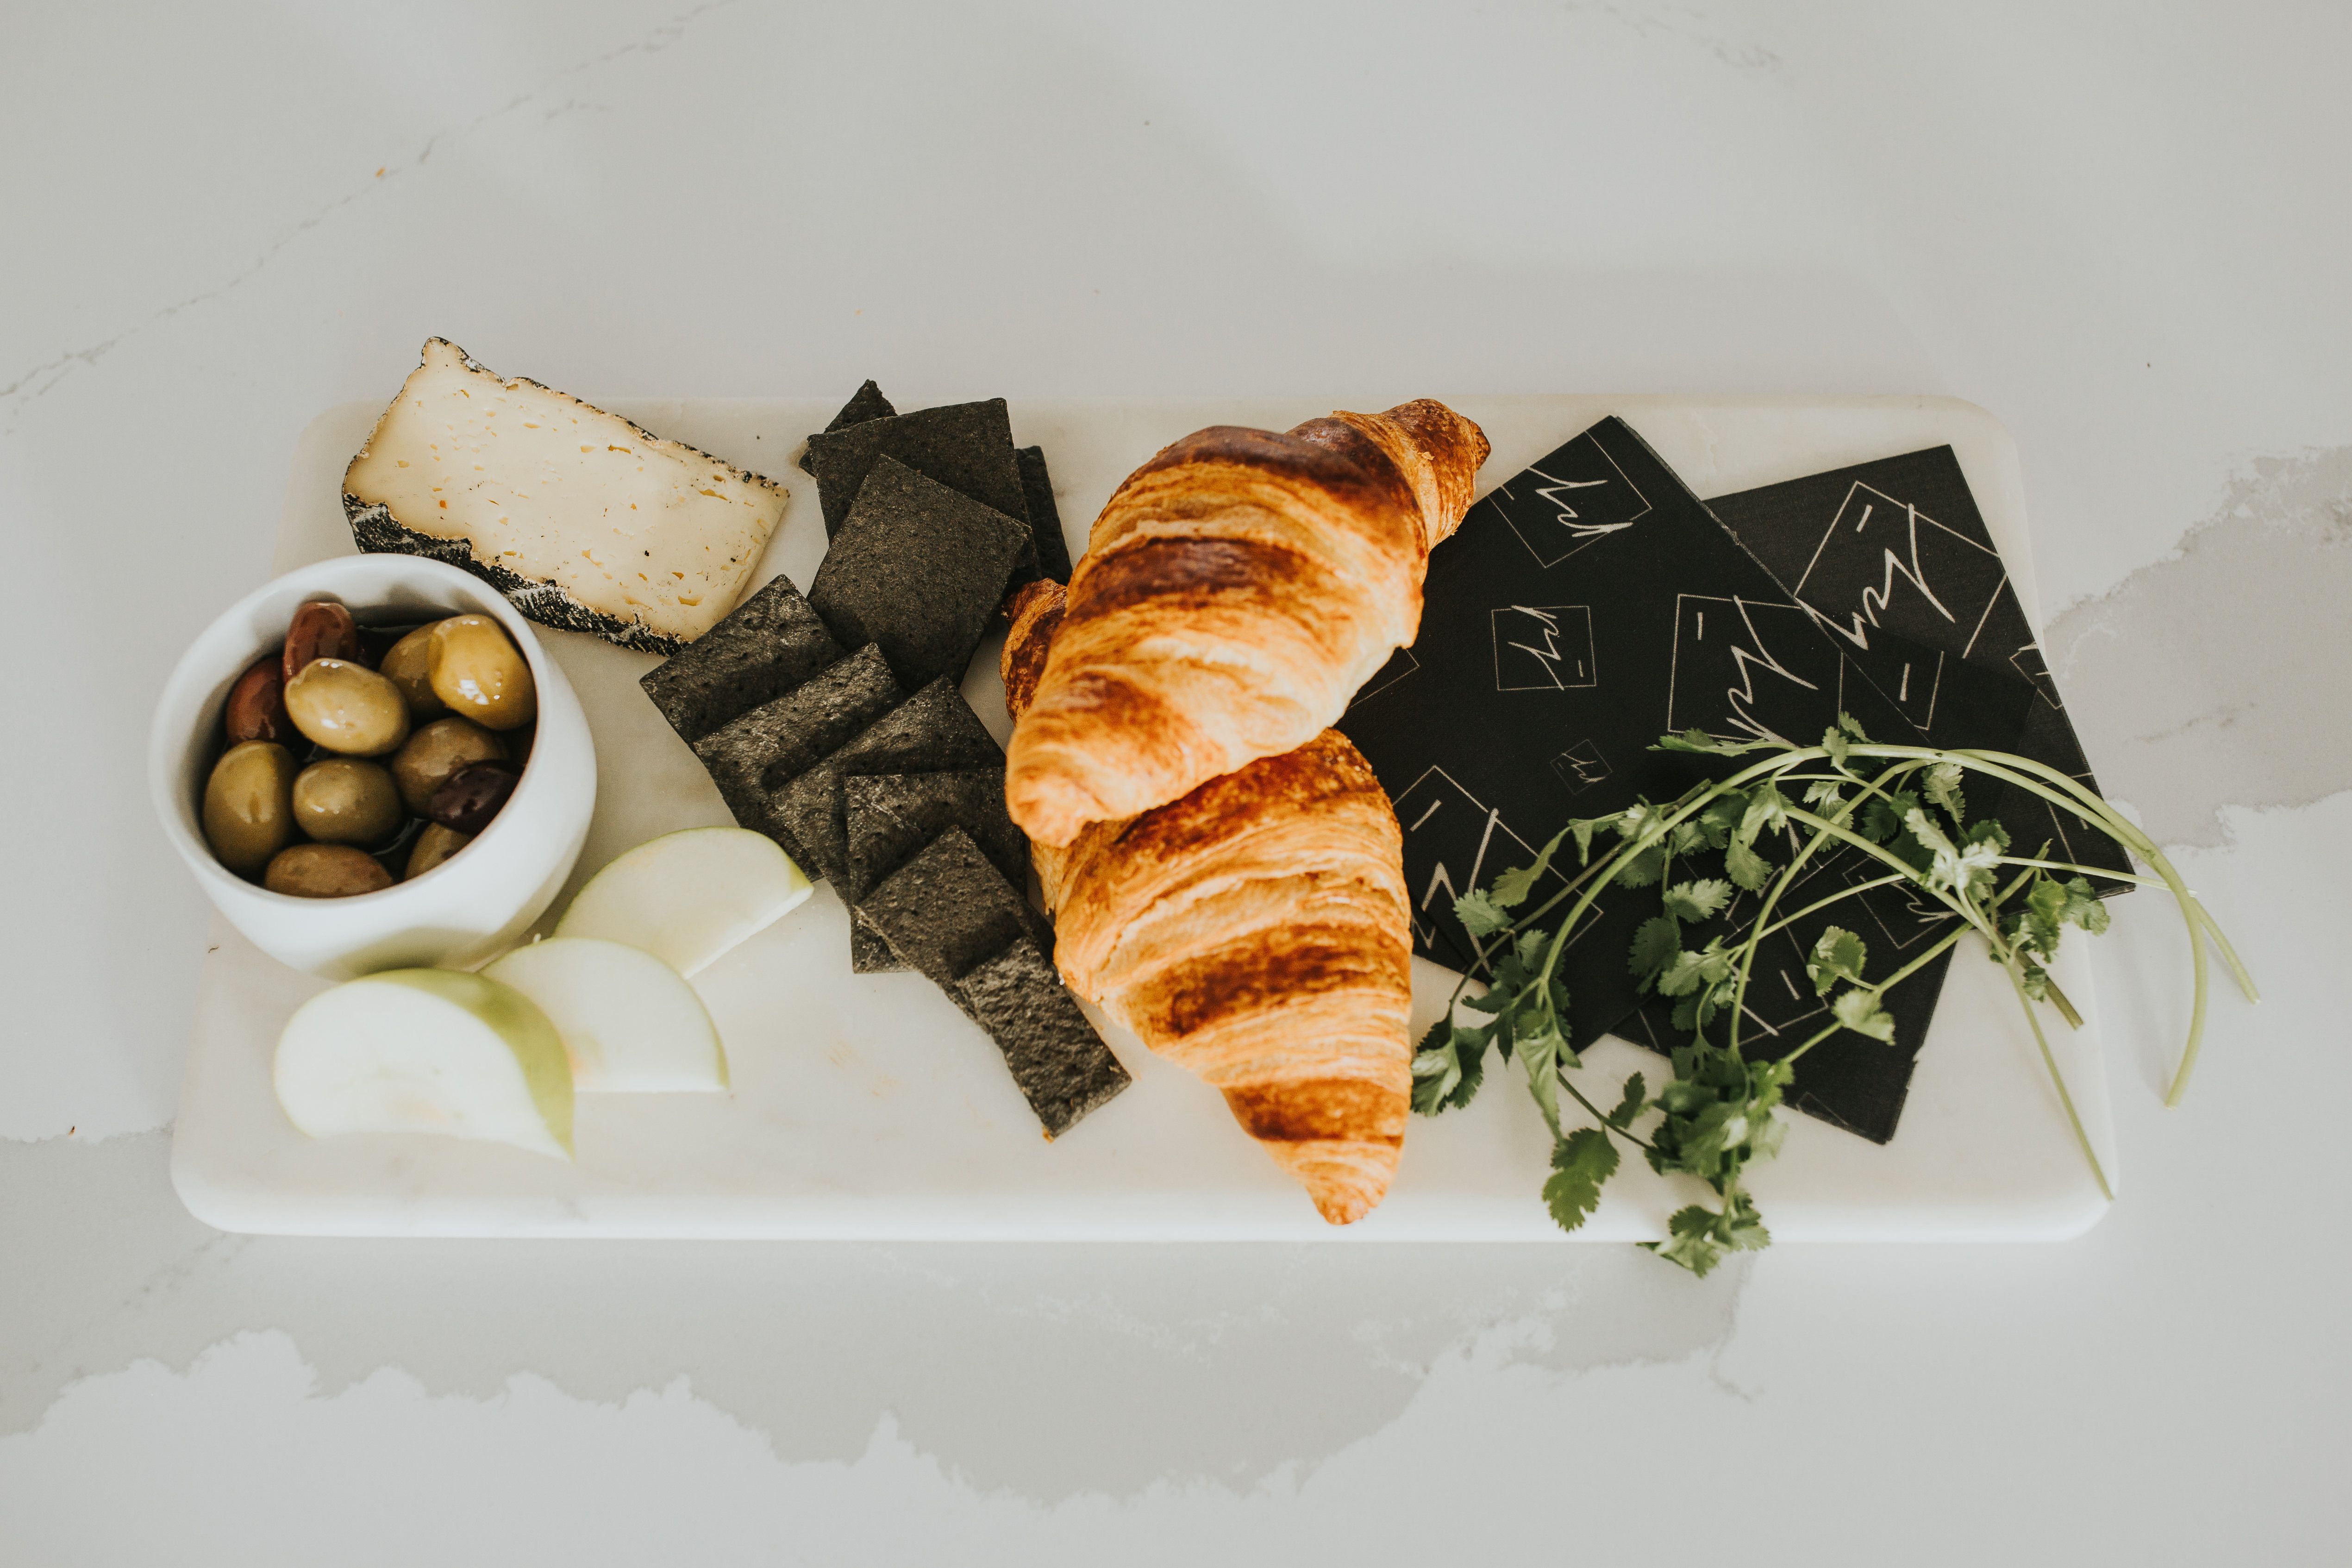 A beatiful charcuterie board made up of cheese, olives, black crackers, green apple, croissants and cilantro. 3 black beeswax wraps are laying on a marble countertop - lifewithPandJ